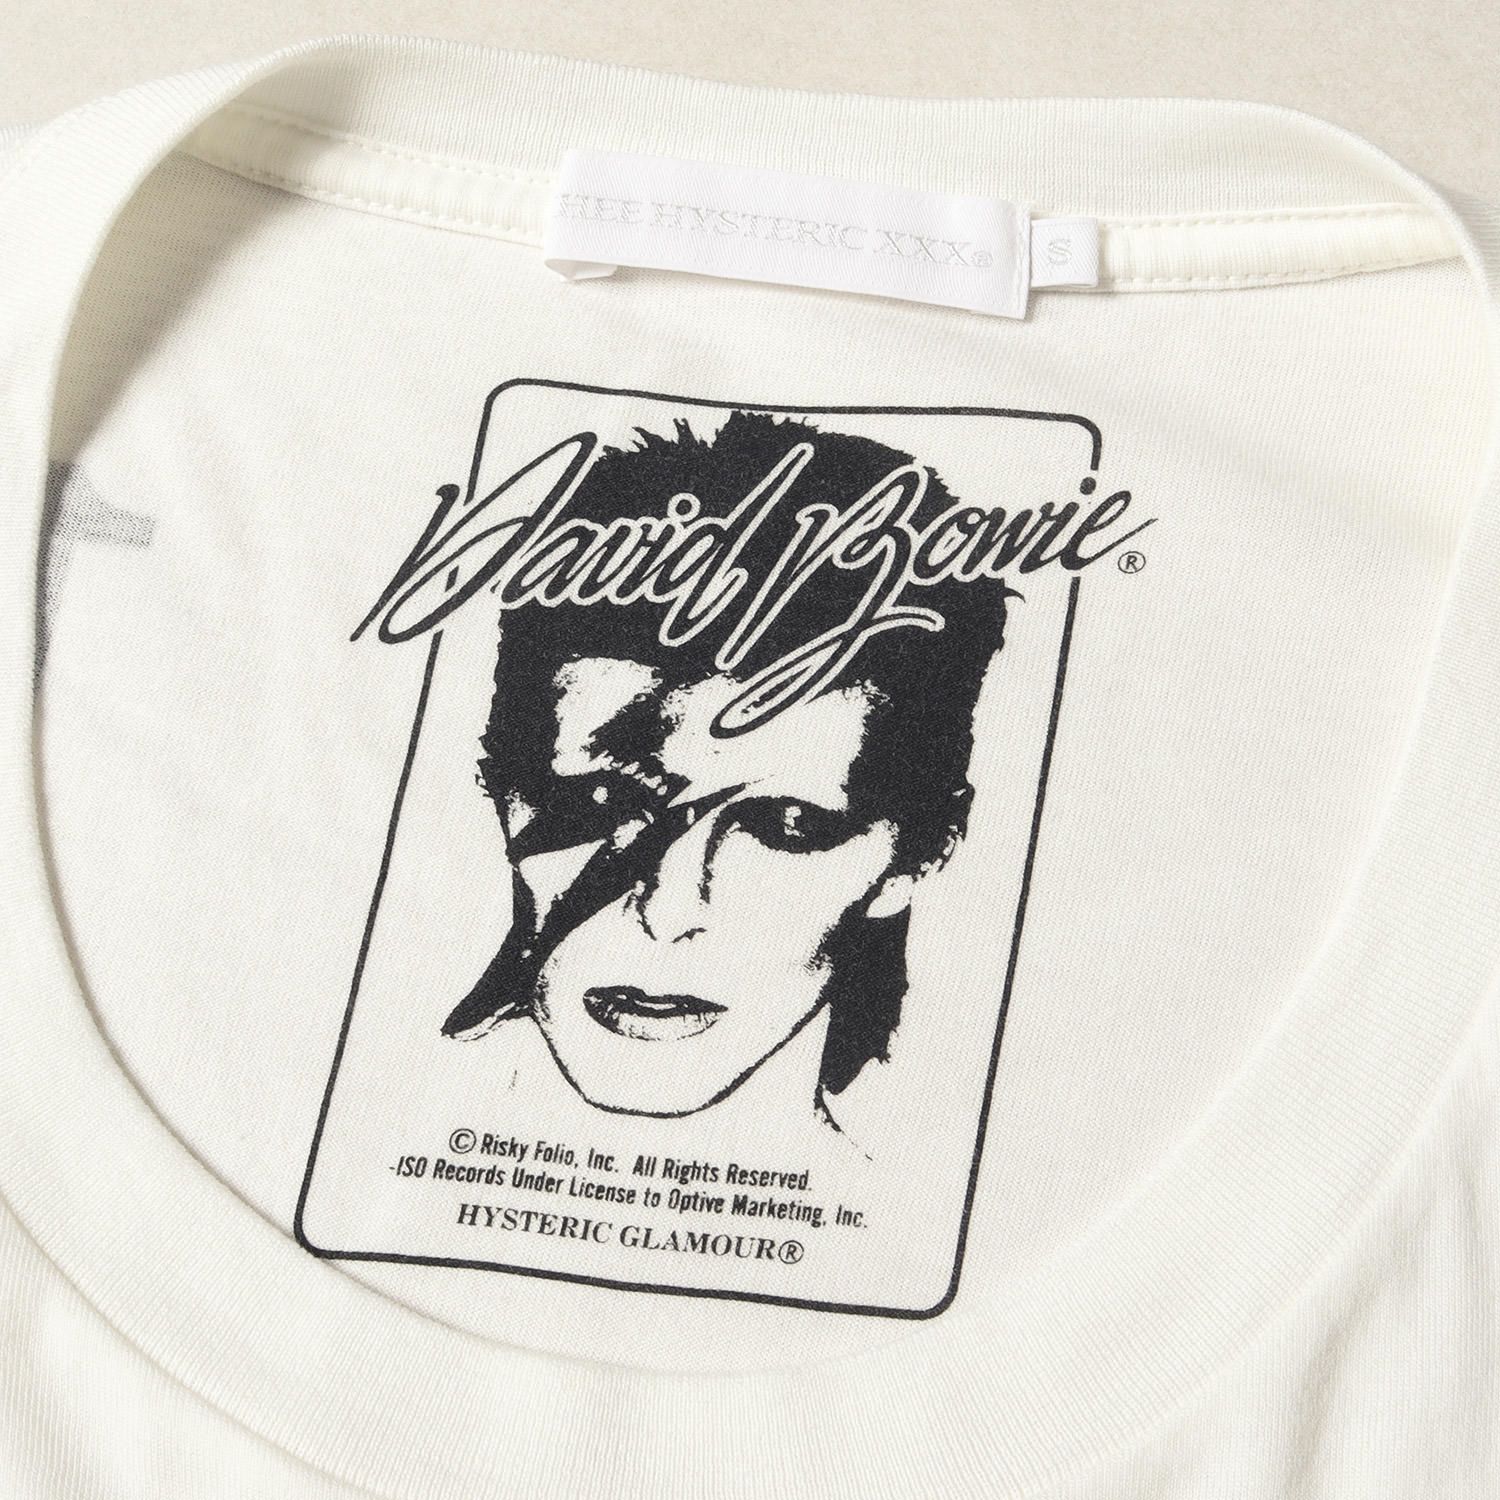 HYSTERIC GLAMOUR ヒステリックグラマー Tシャツ サイズ:S David Bowie 